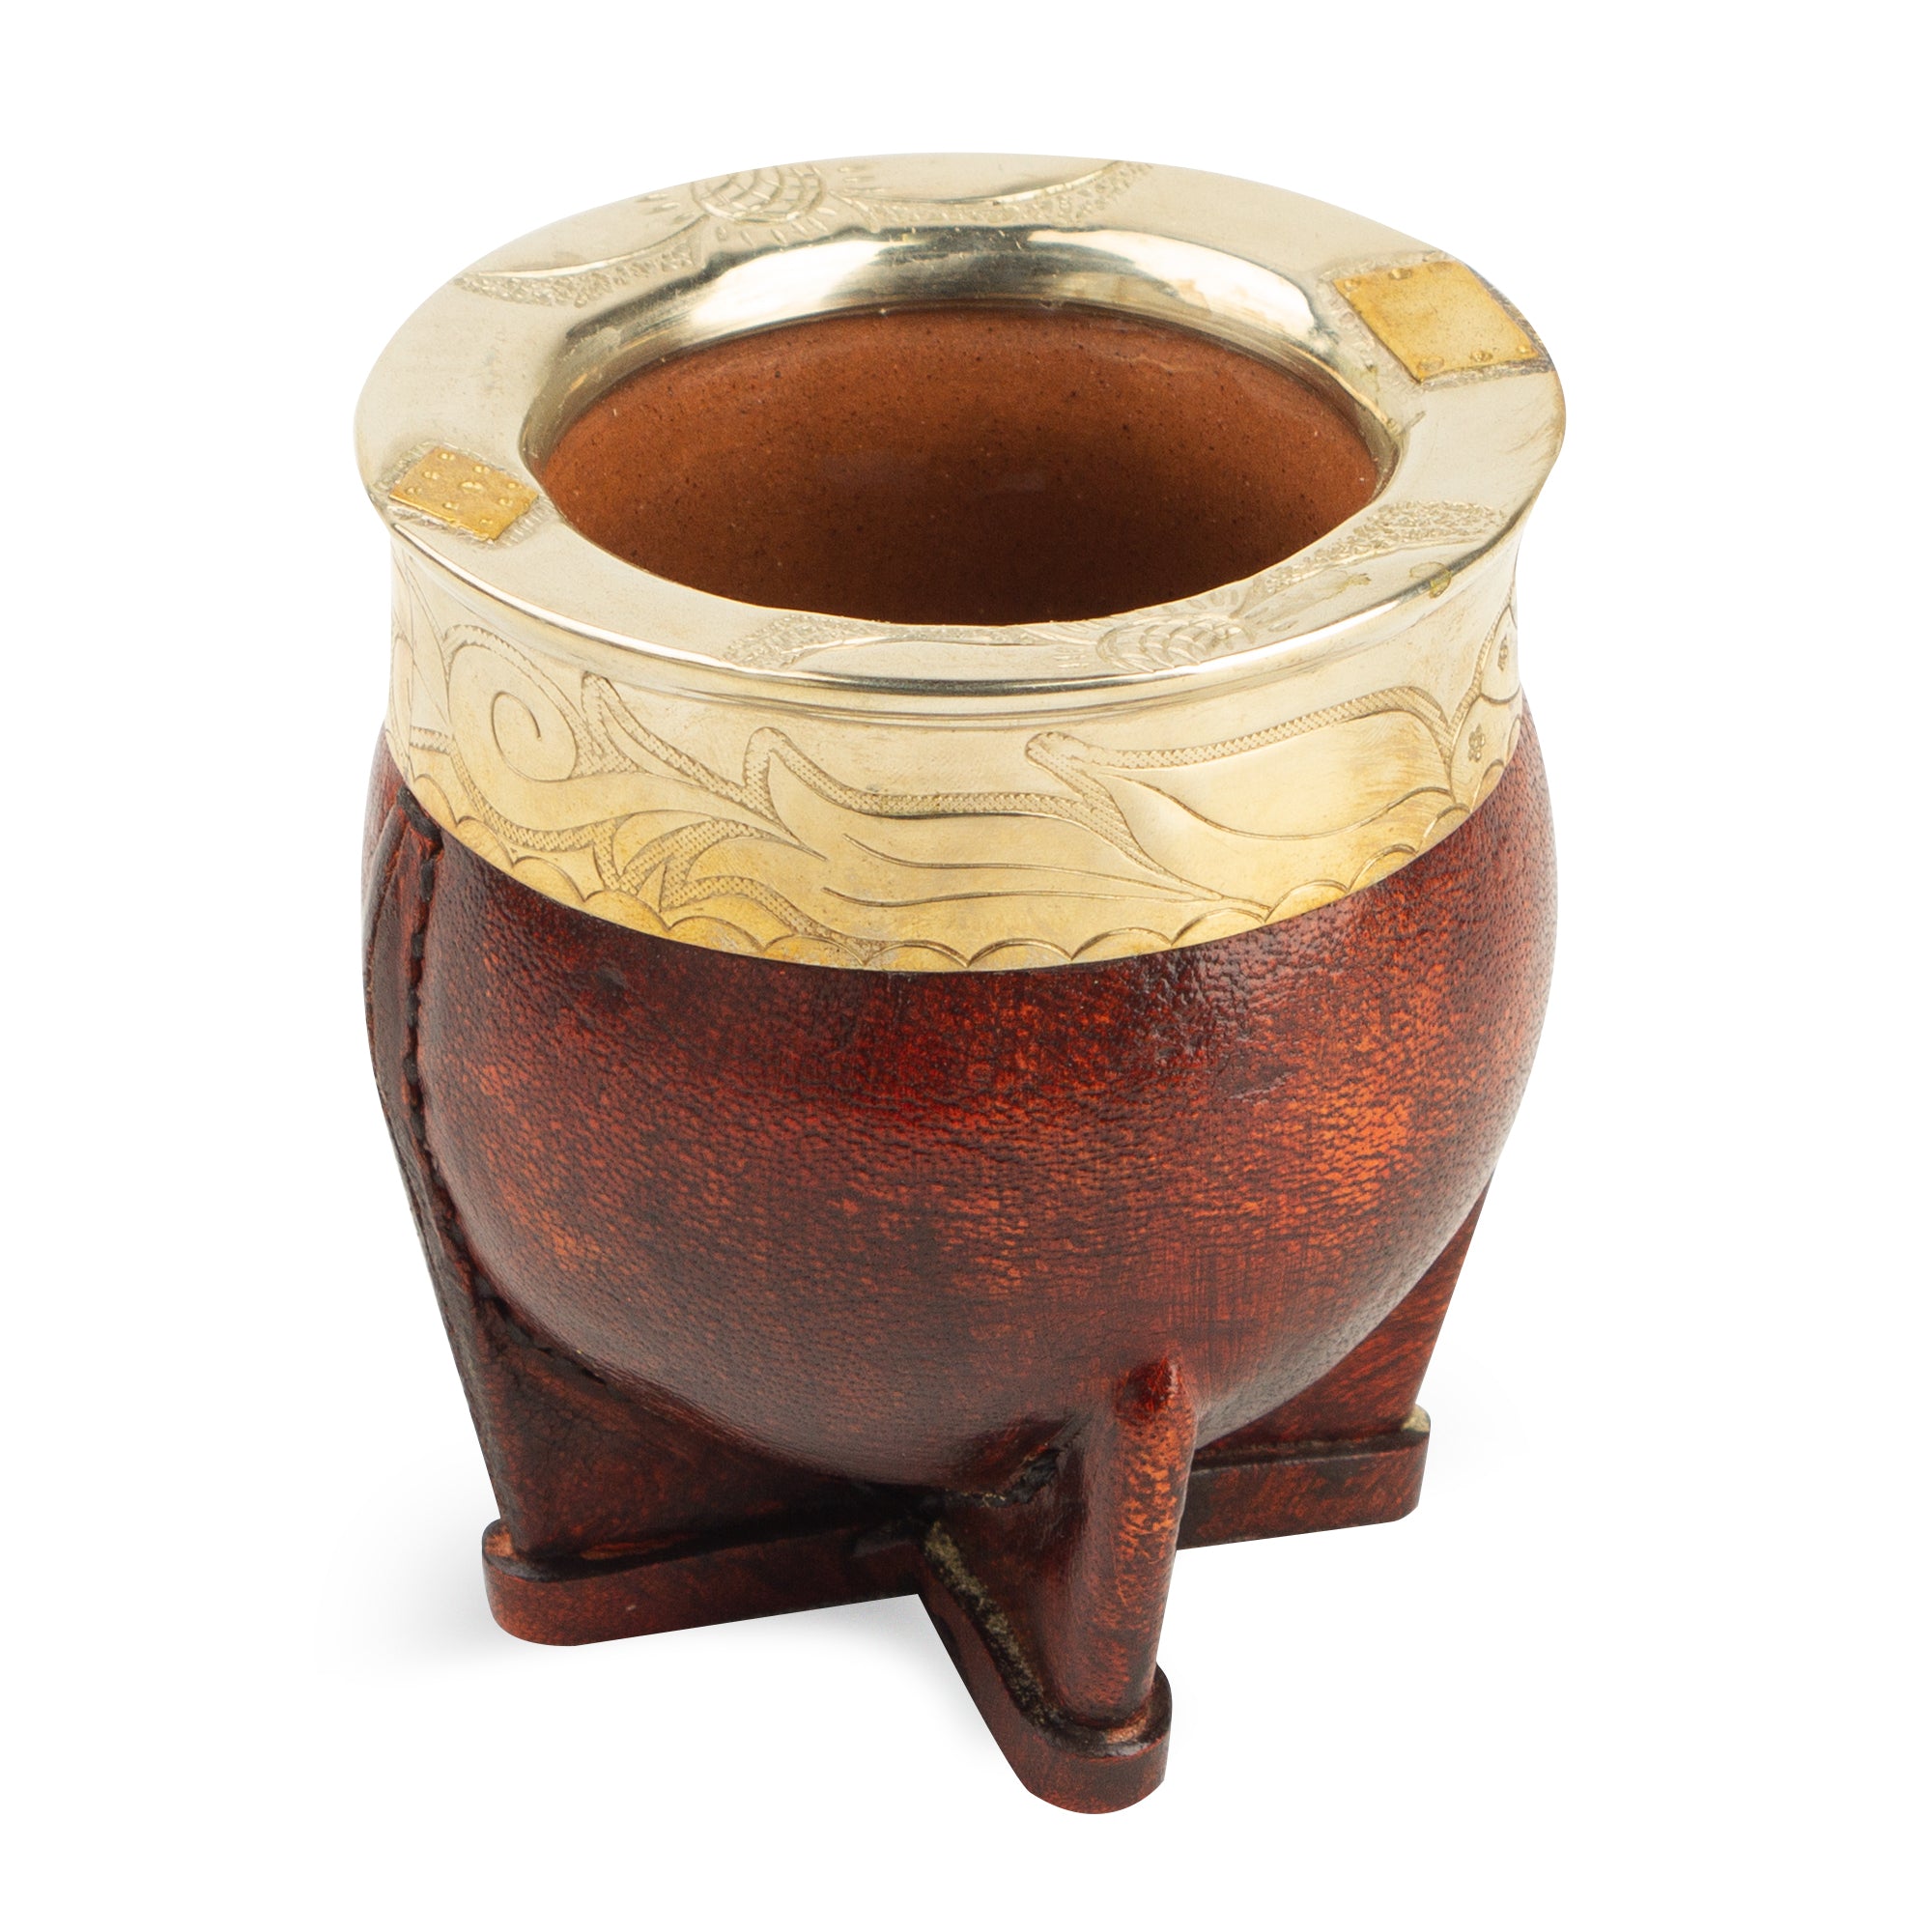 Imperial Style - Crafted Ceramic Mate Teacup – Wrapped in Coppery